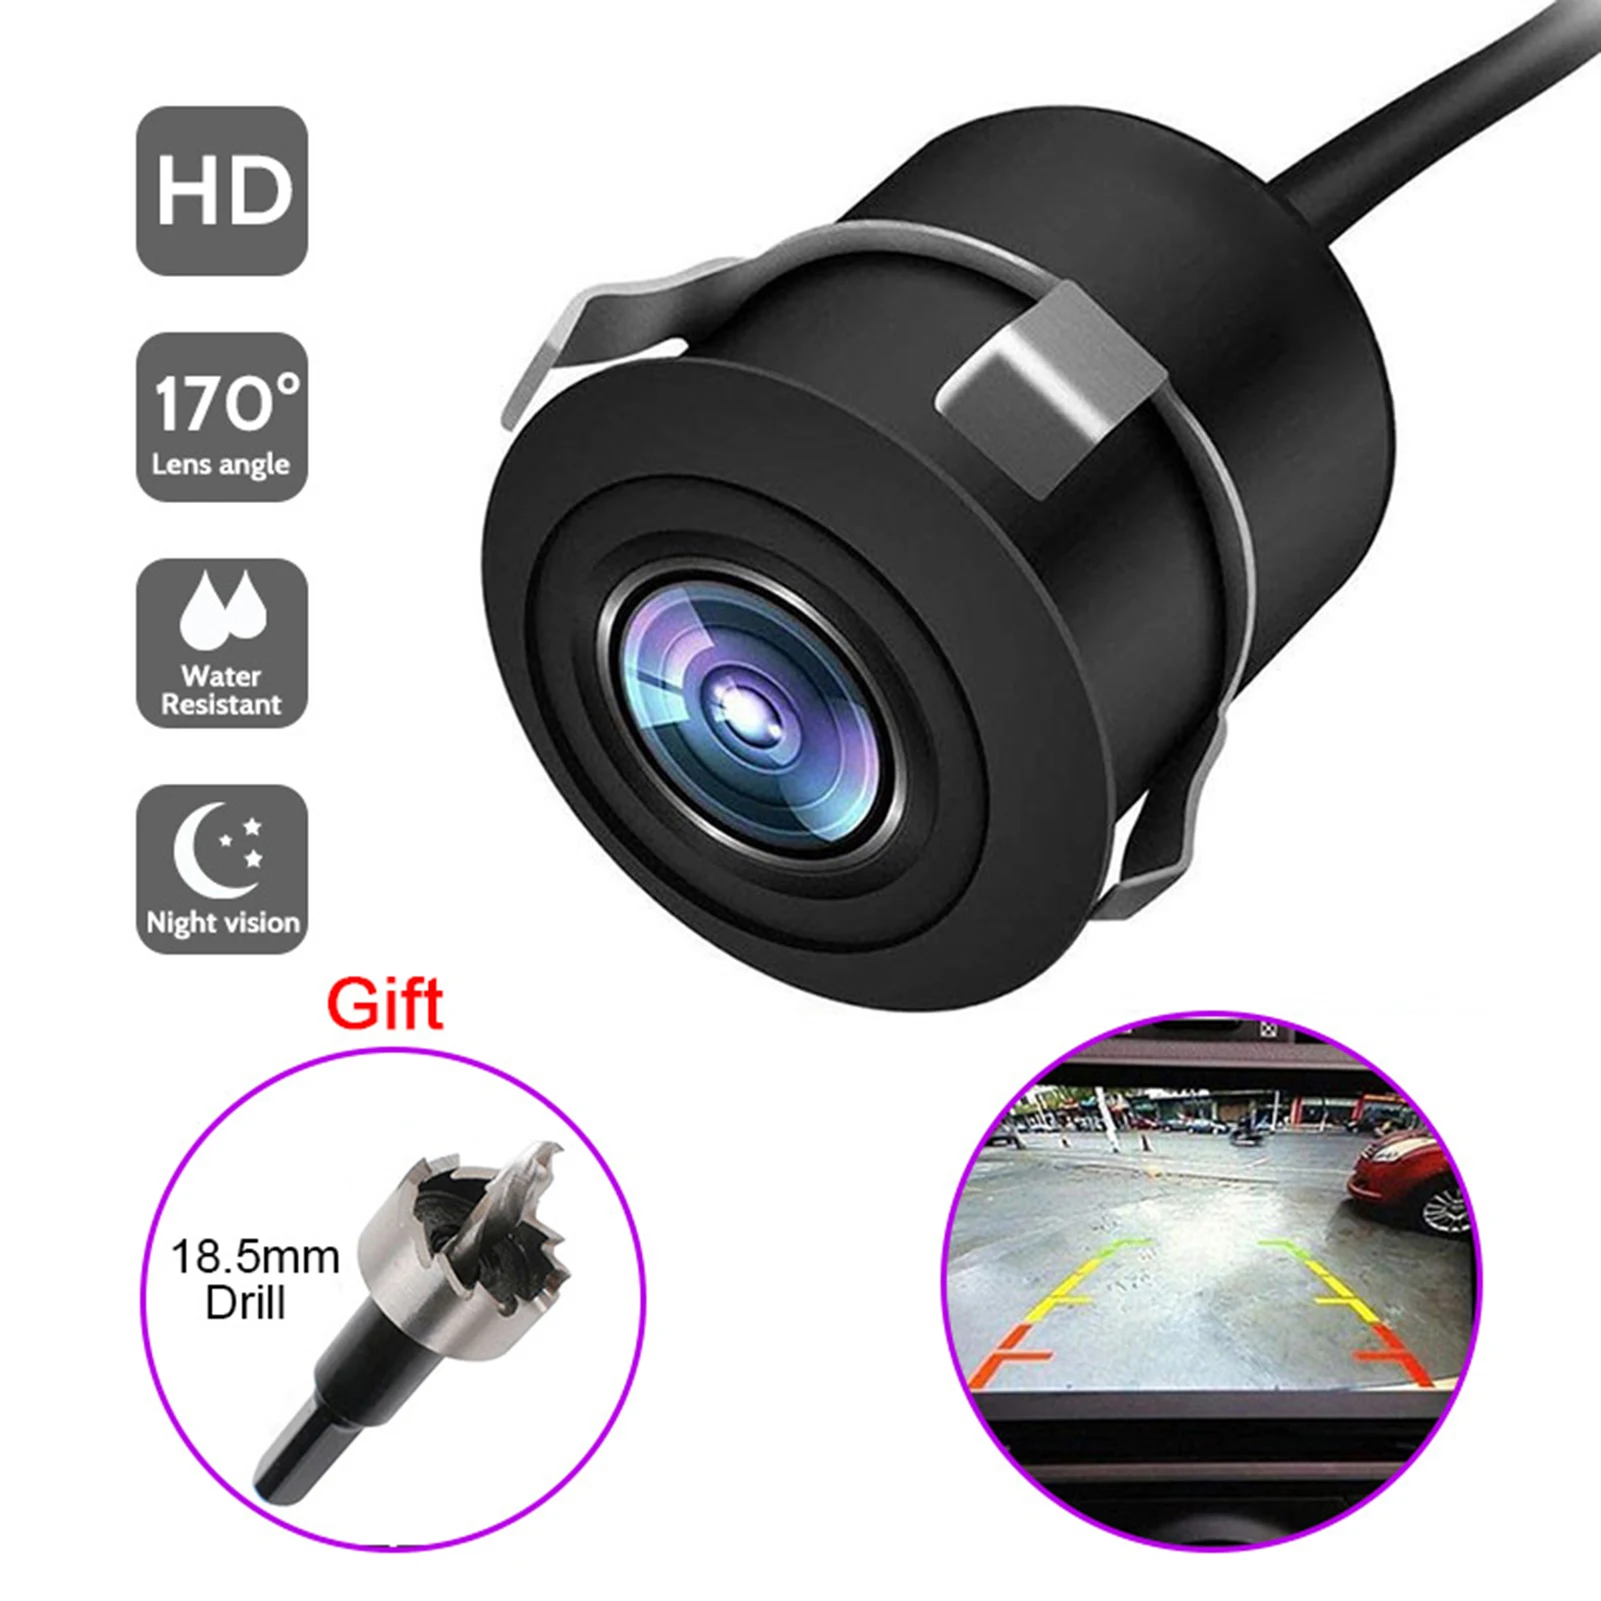 

Reverse Backup Camera Rear View Camera Easy Installation With 170 Degree Wide Angle Night Vision Screen Display Waterproof Car